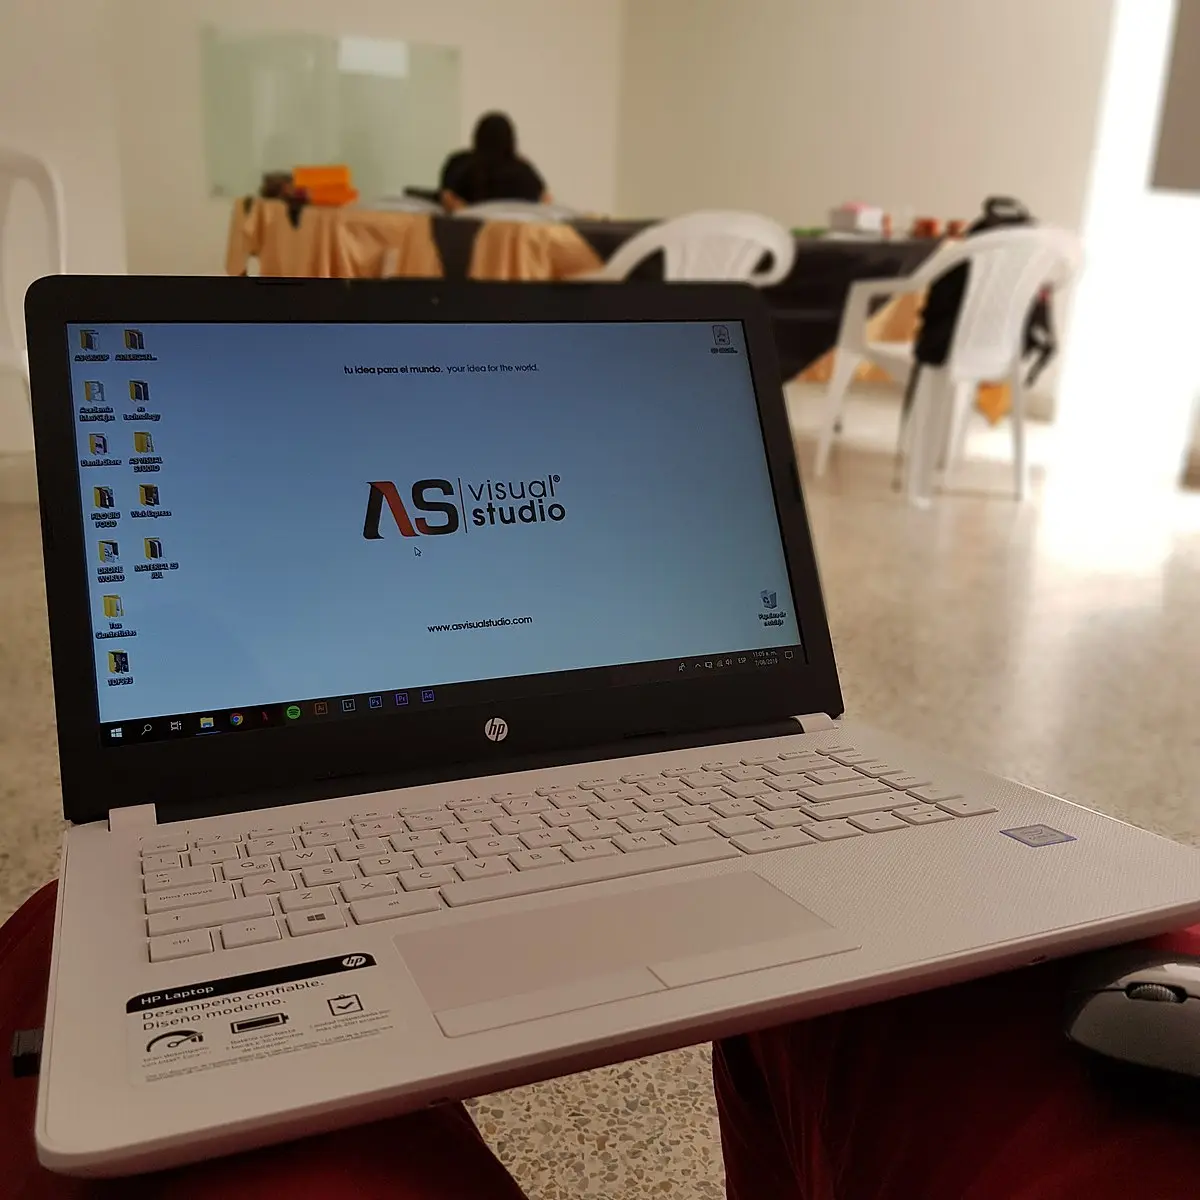 Hp stream laptop review: features, performance, and user experience